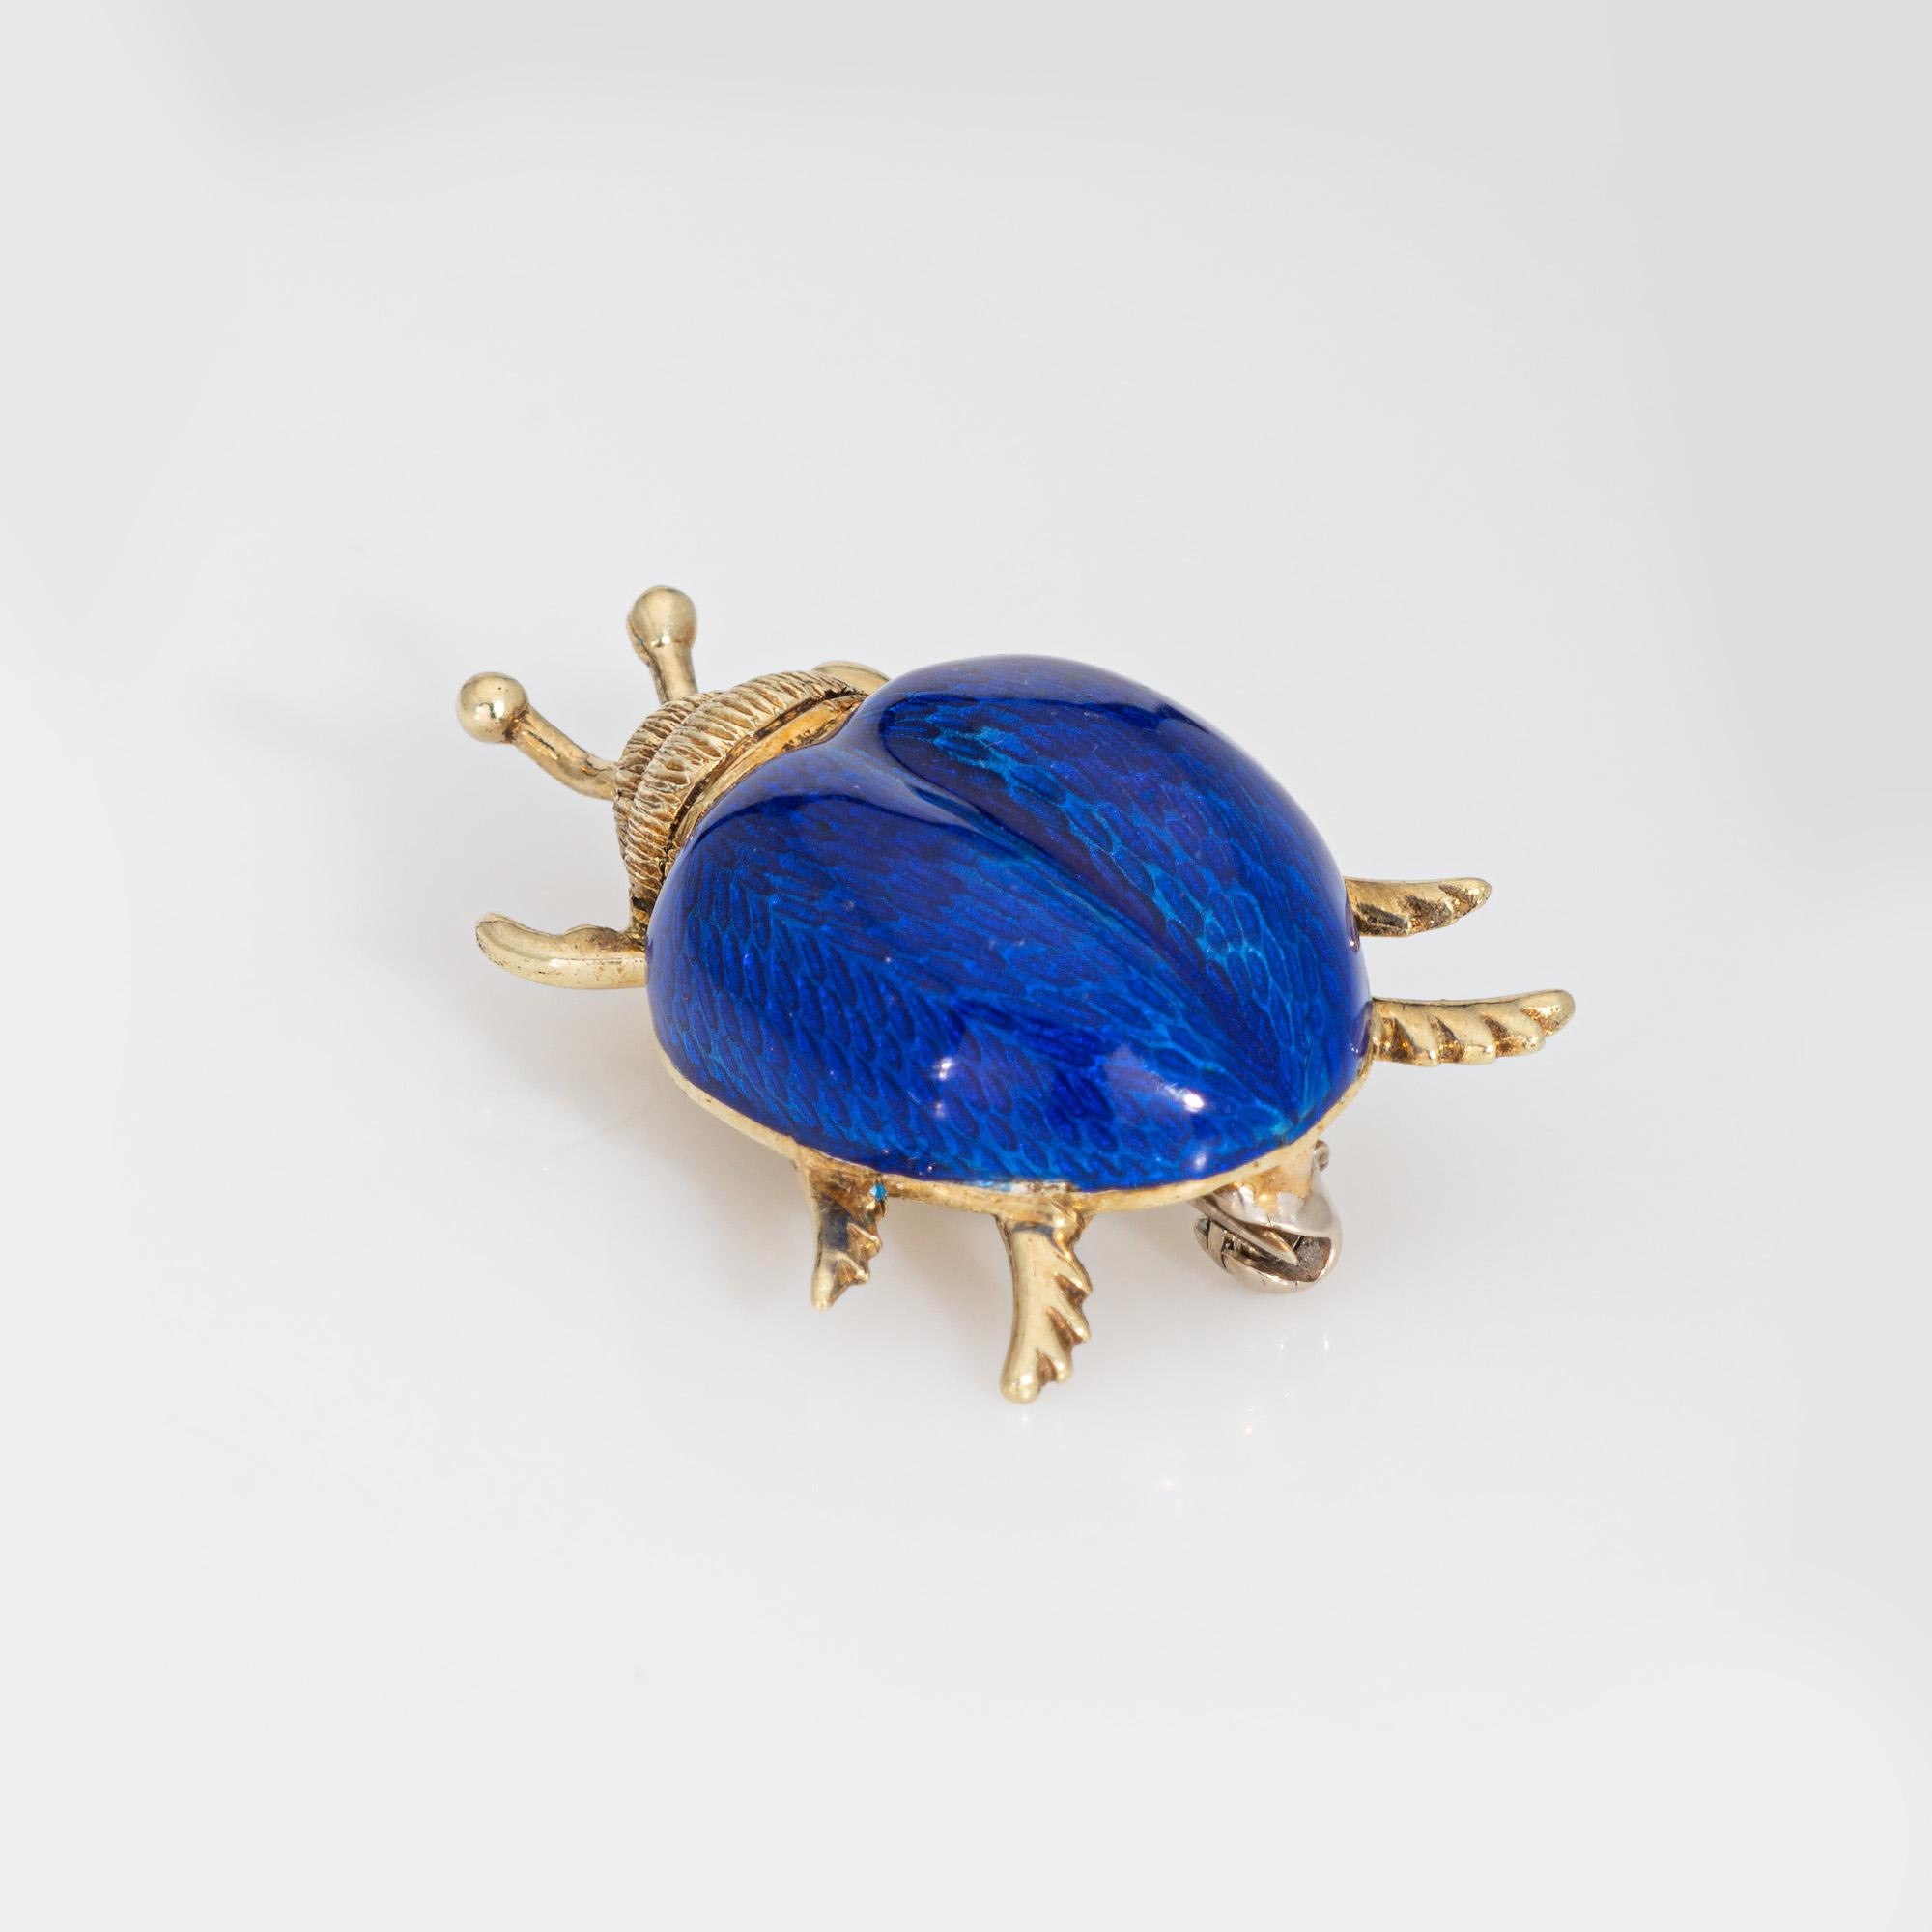 Vintage Beetle Brooch Blue Enamel 14k Yellow Gold Martine Estate Fine Jewelry  In Good Condition For Sale In Torrance, CA